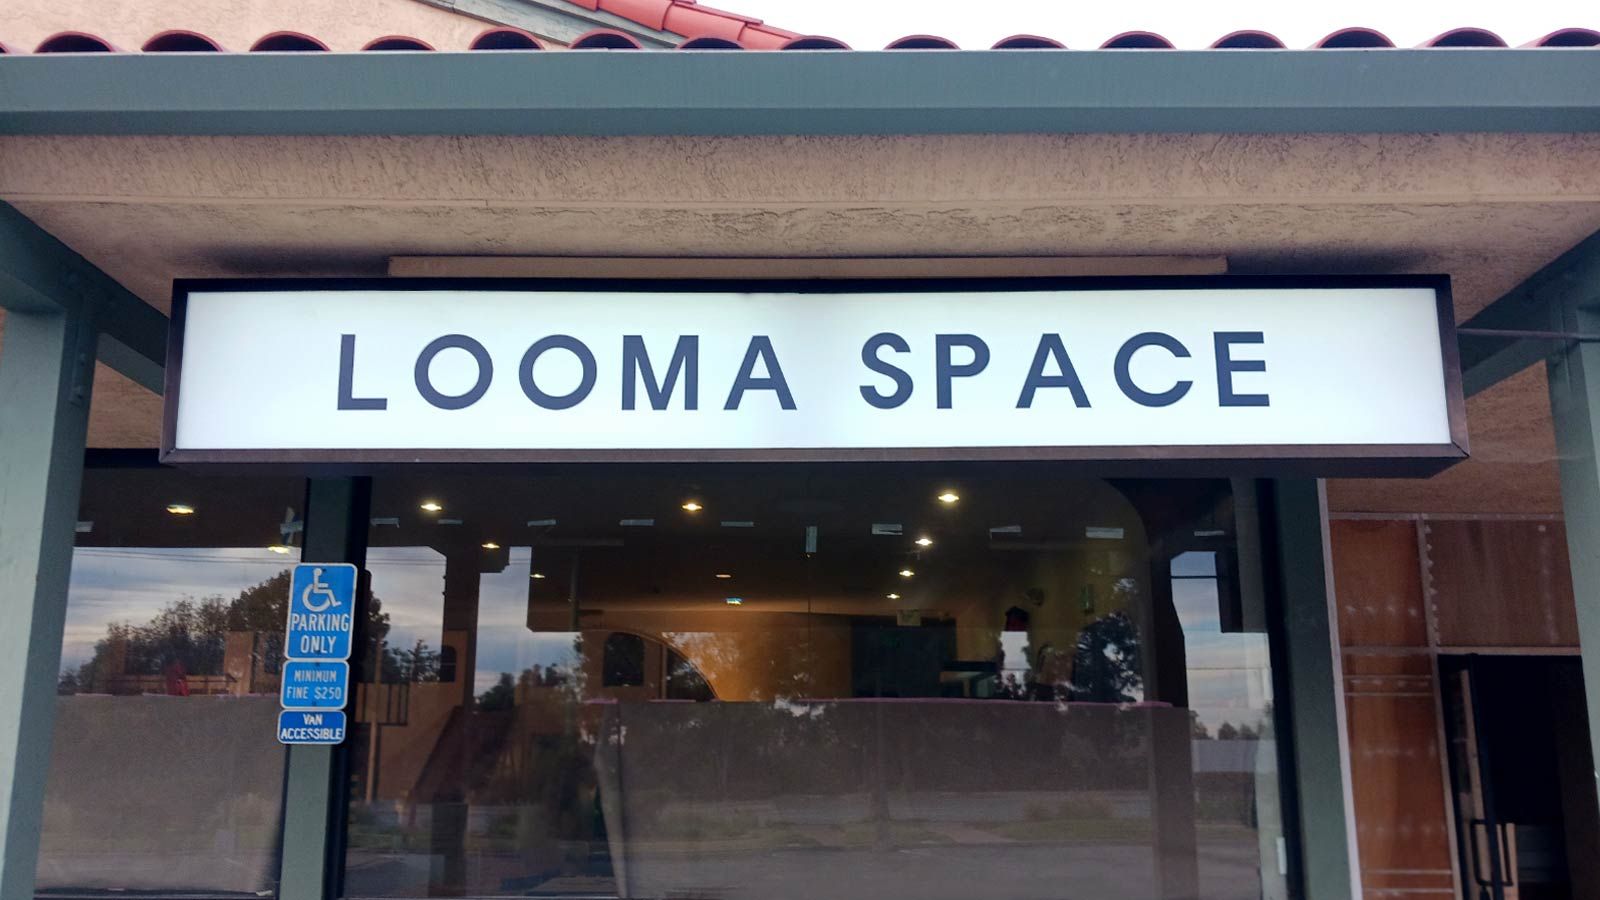 Looma Space light up sign face replacement